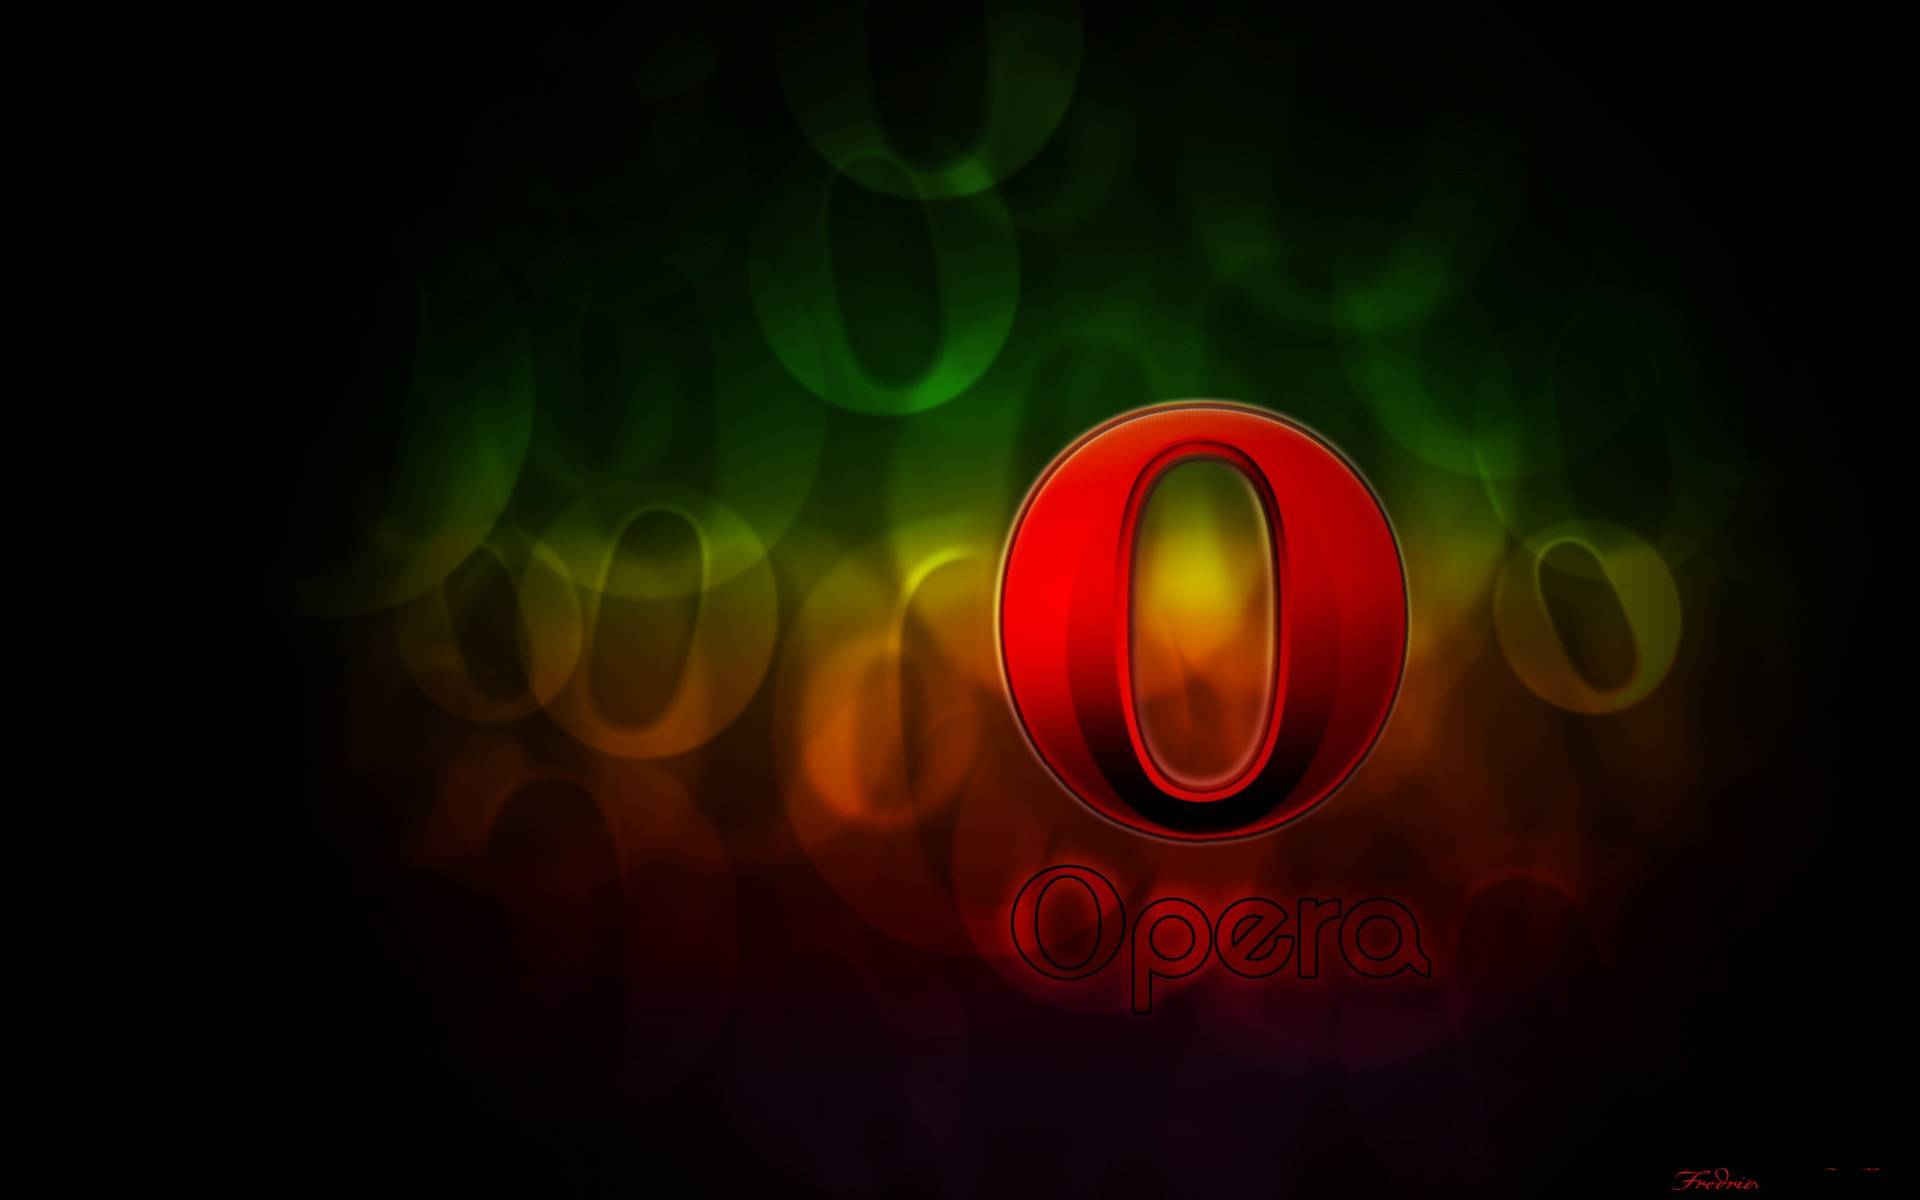 Wallpapers opera browser icon on the desktop